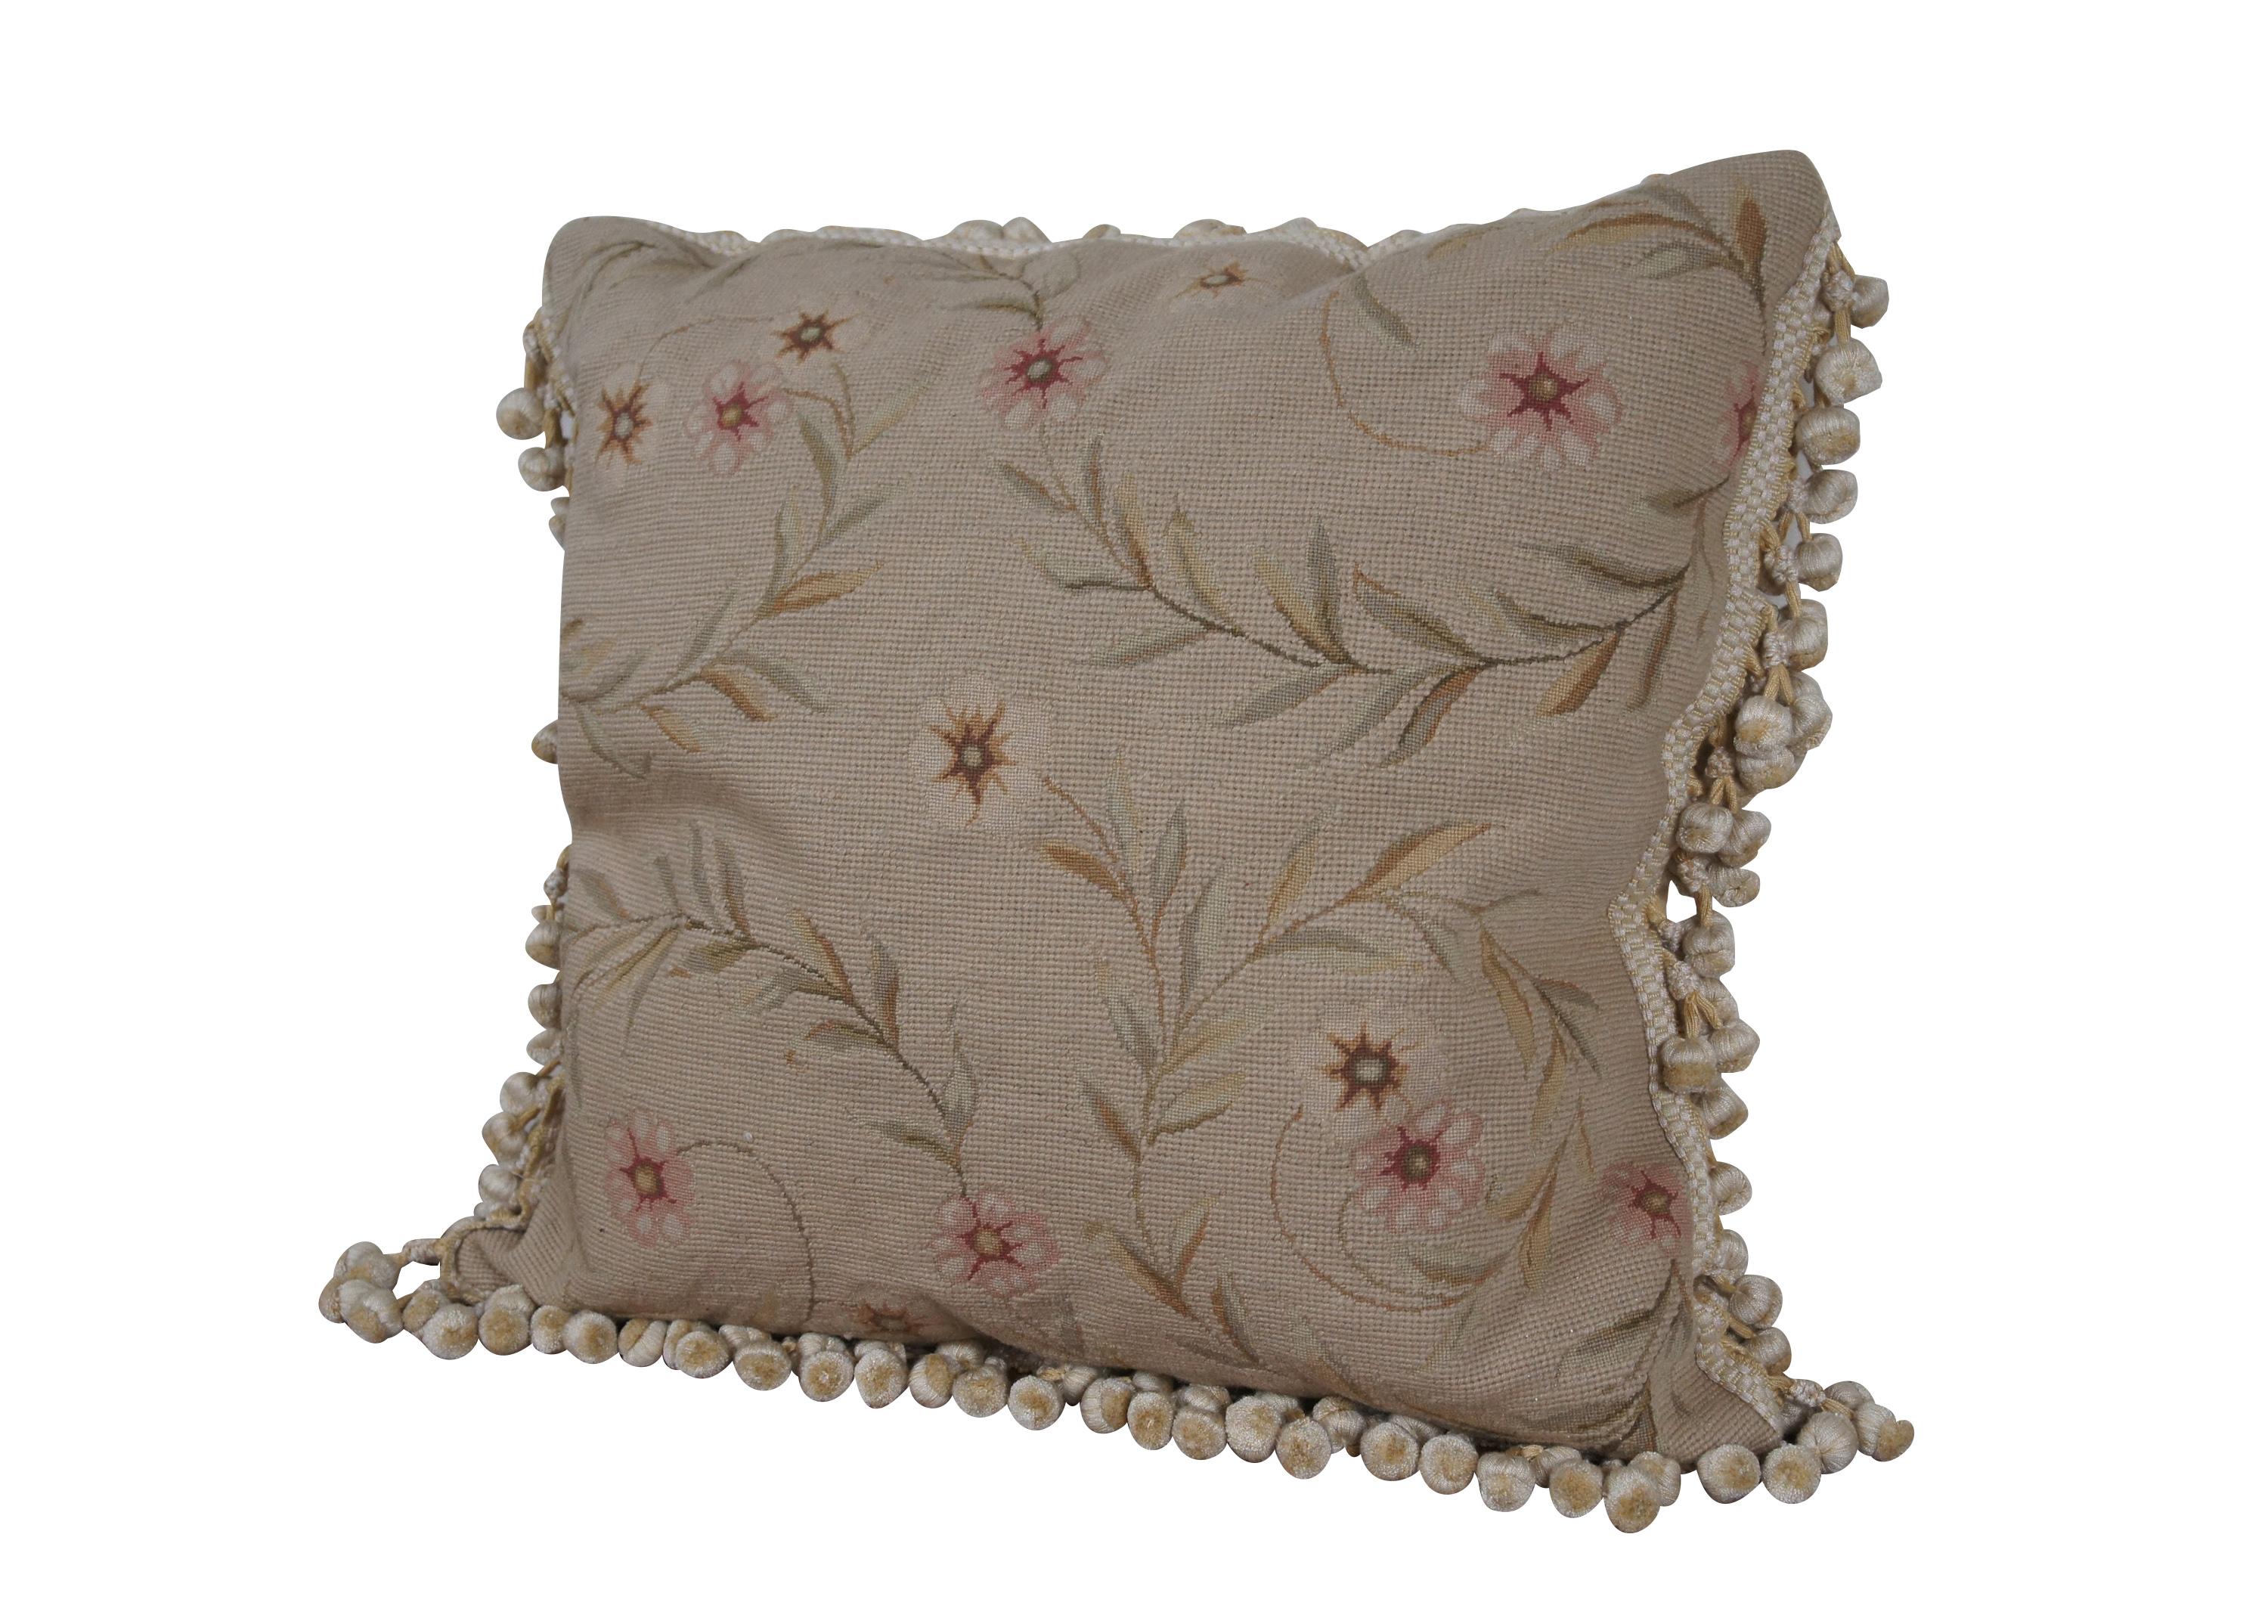 20th century square needlepoint throw pillow, hand embroidered with pink and cream morning glories, on spiraling leafy stems and a beige background. Cream and yellow ball tassel trim. Beige velour back with zipper closure. Down